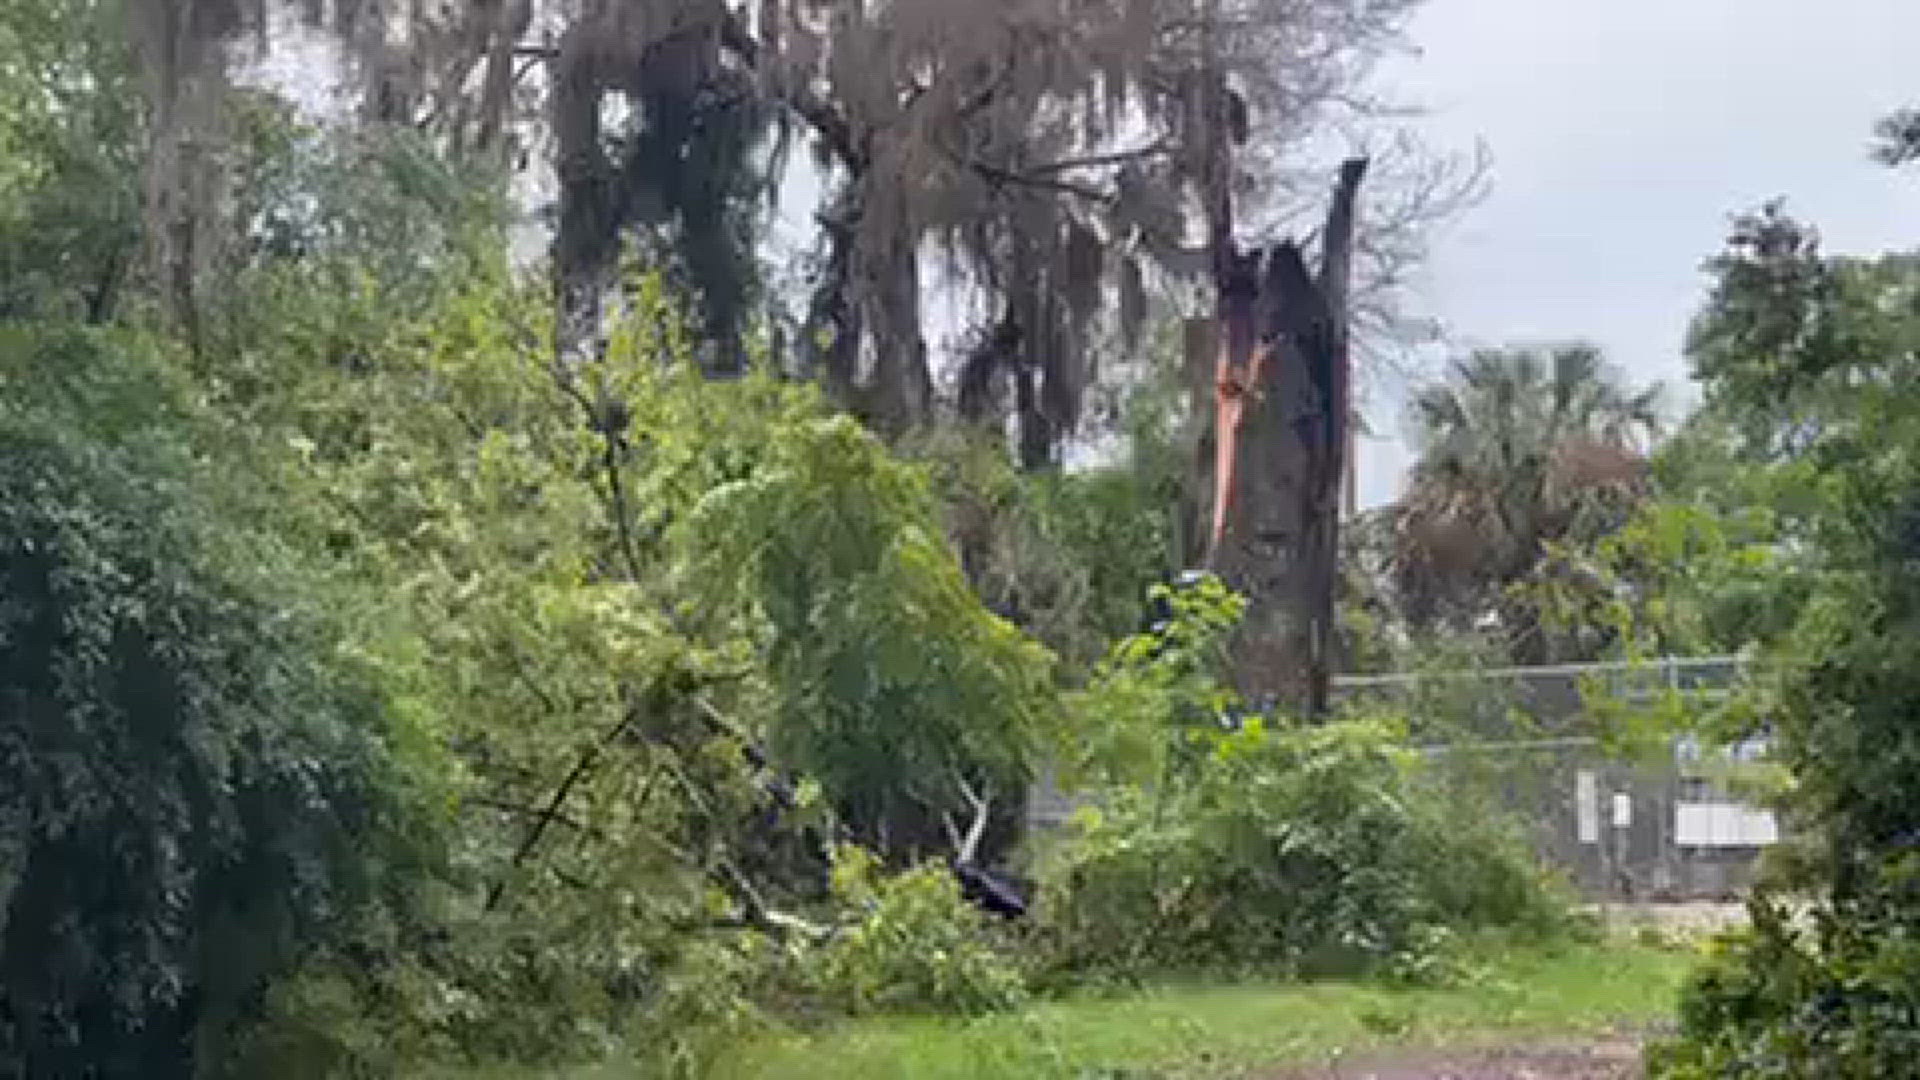 Trees by Riverview Park in Jacksonville were snapped, split on Friday during severe weather.
Credit: Renata Di Gregorio